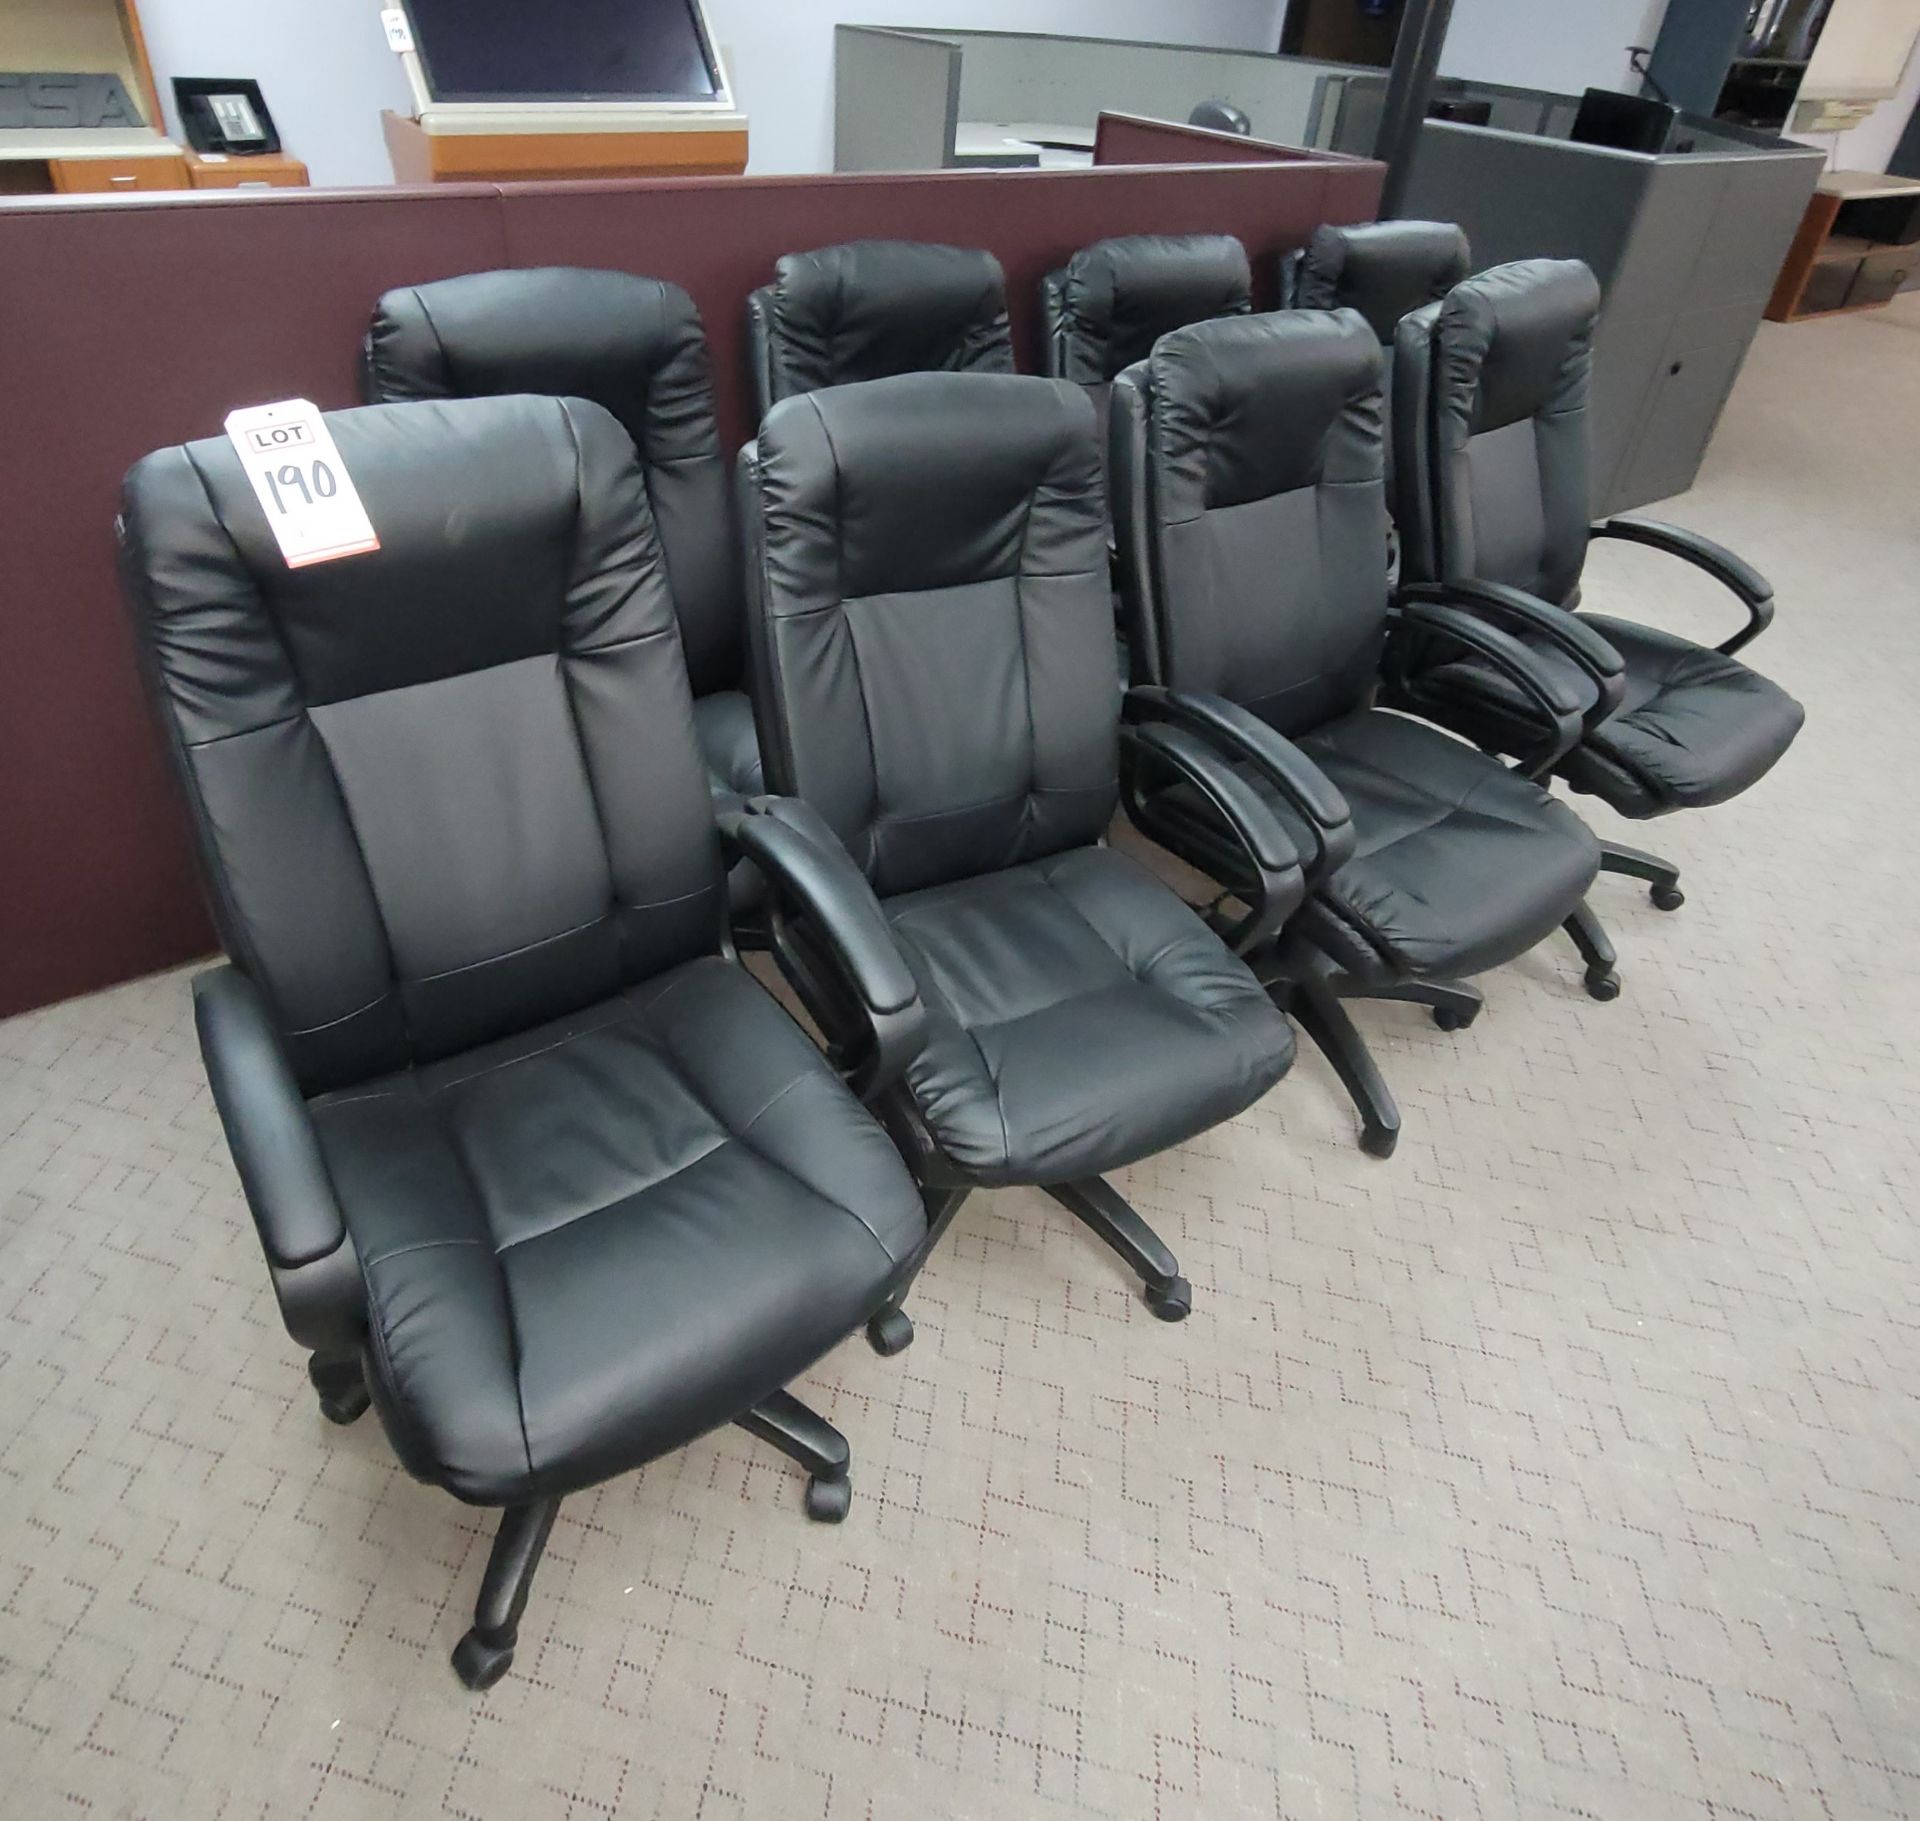 LOT - (8) PLUSH LEATHER HIGH BACK CONFERENCE ROOM CHAIRS W/ PNEUMATIC SEAT ADJUSTMENT